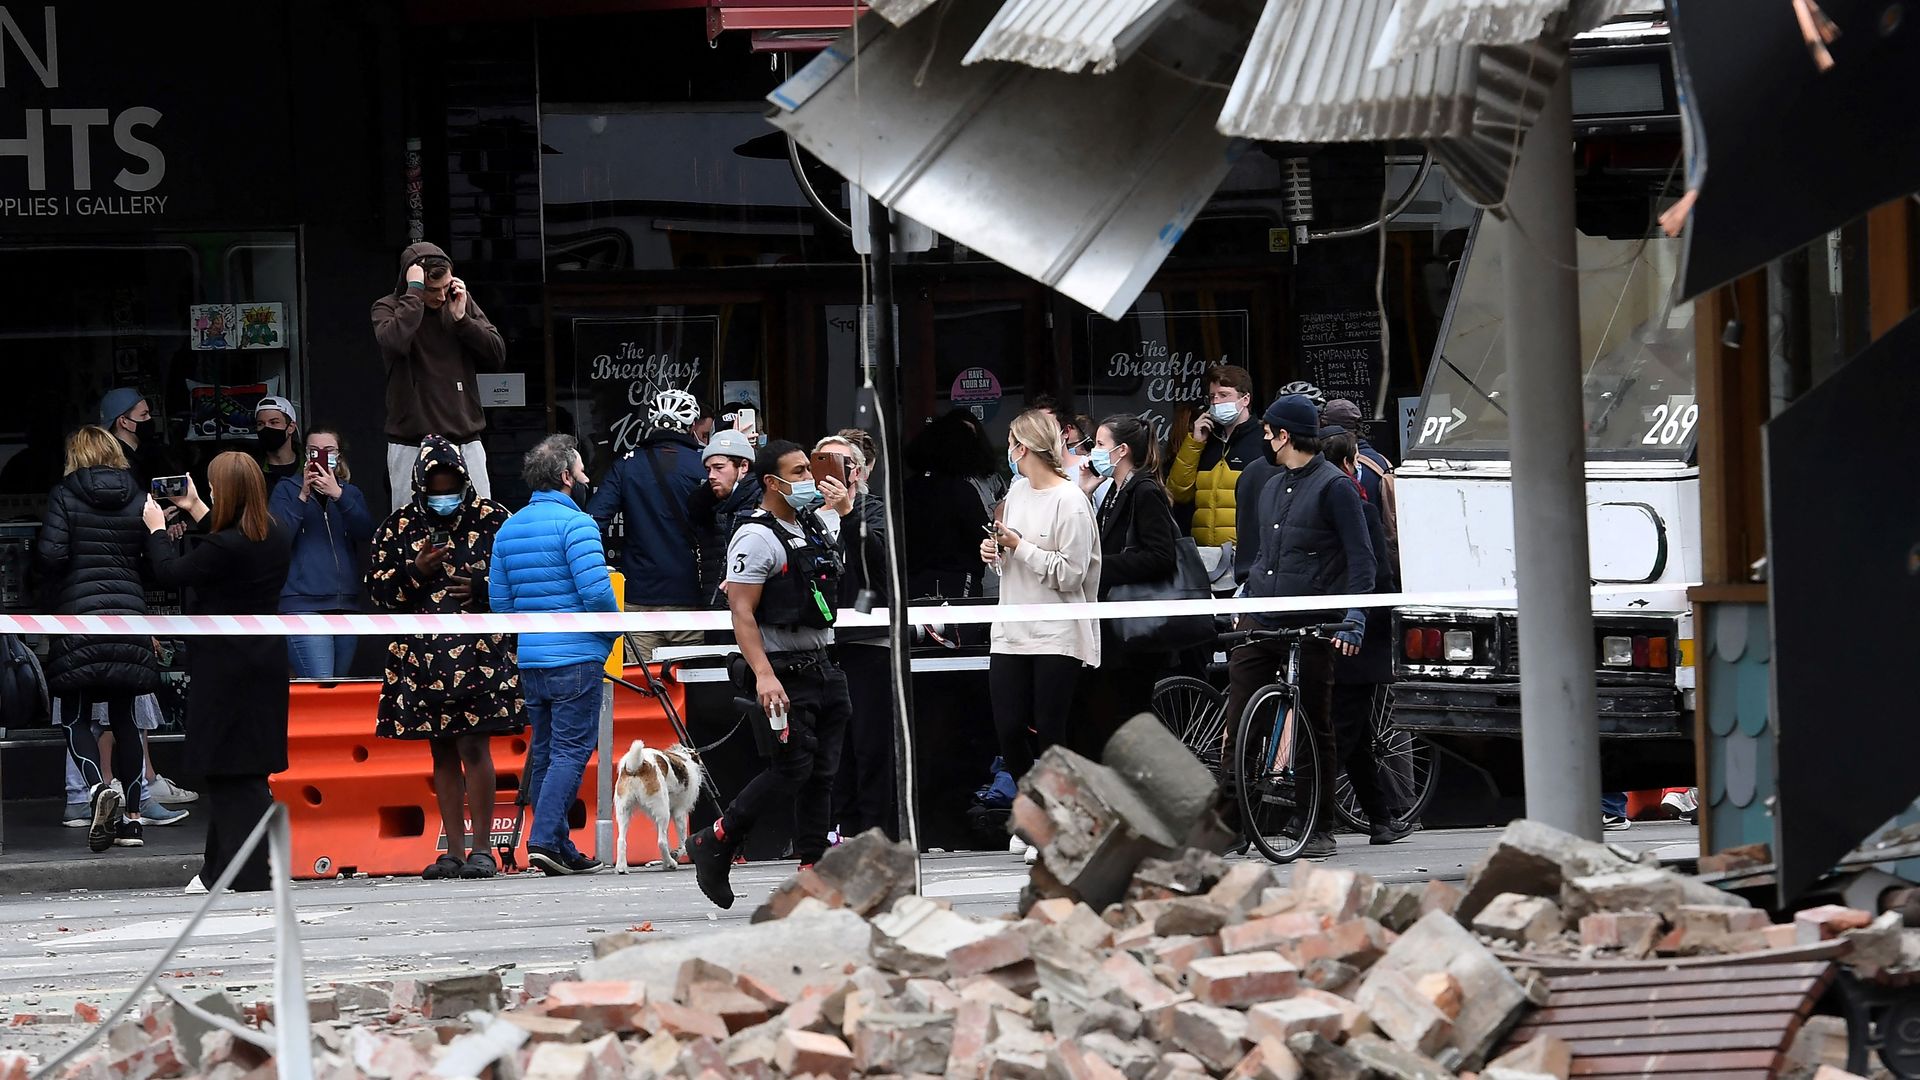  Residents and media gather near a damaged building in the popular shopping Chappel Street in Melbourne on September 22, 2021, after a 5.9 magnitude earthquake.